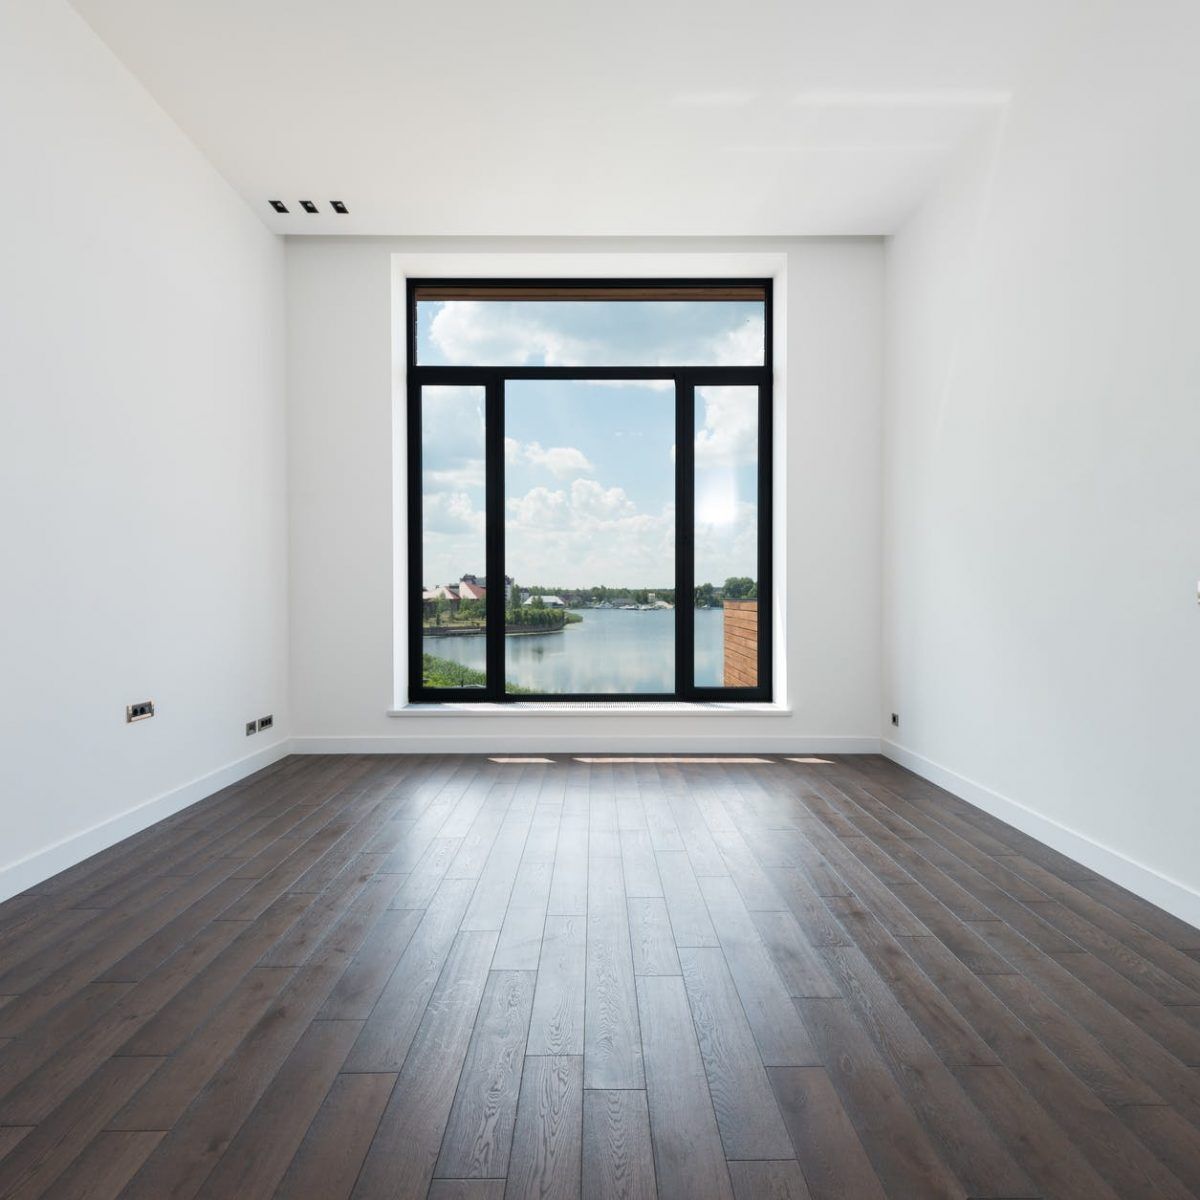 2022 Laminate Flooring Trends You Won’t Want to Miss